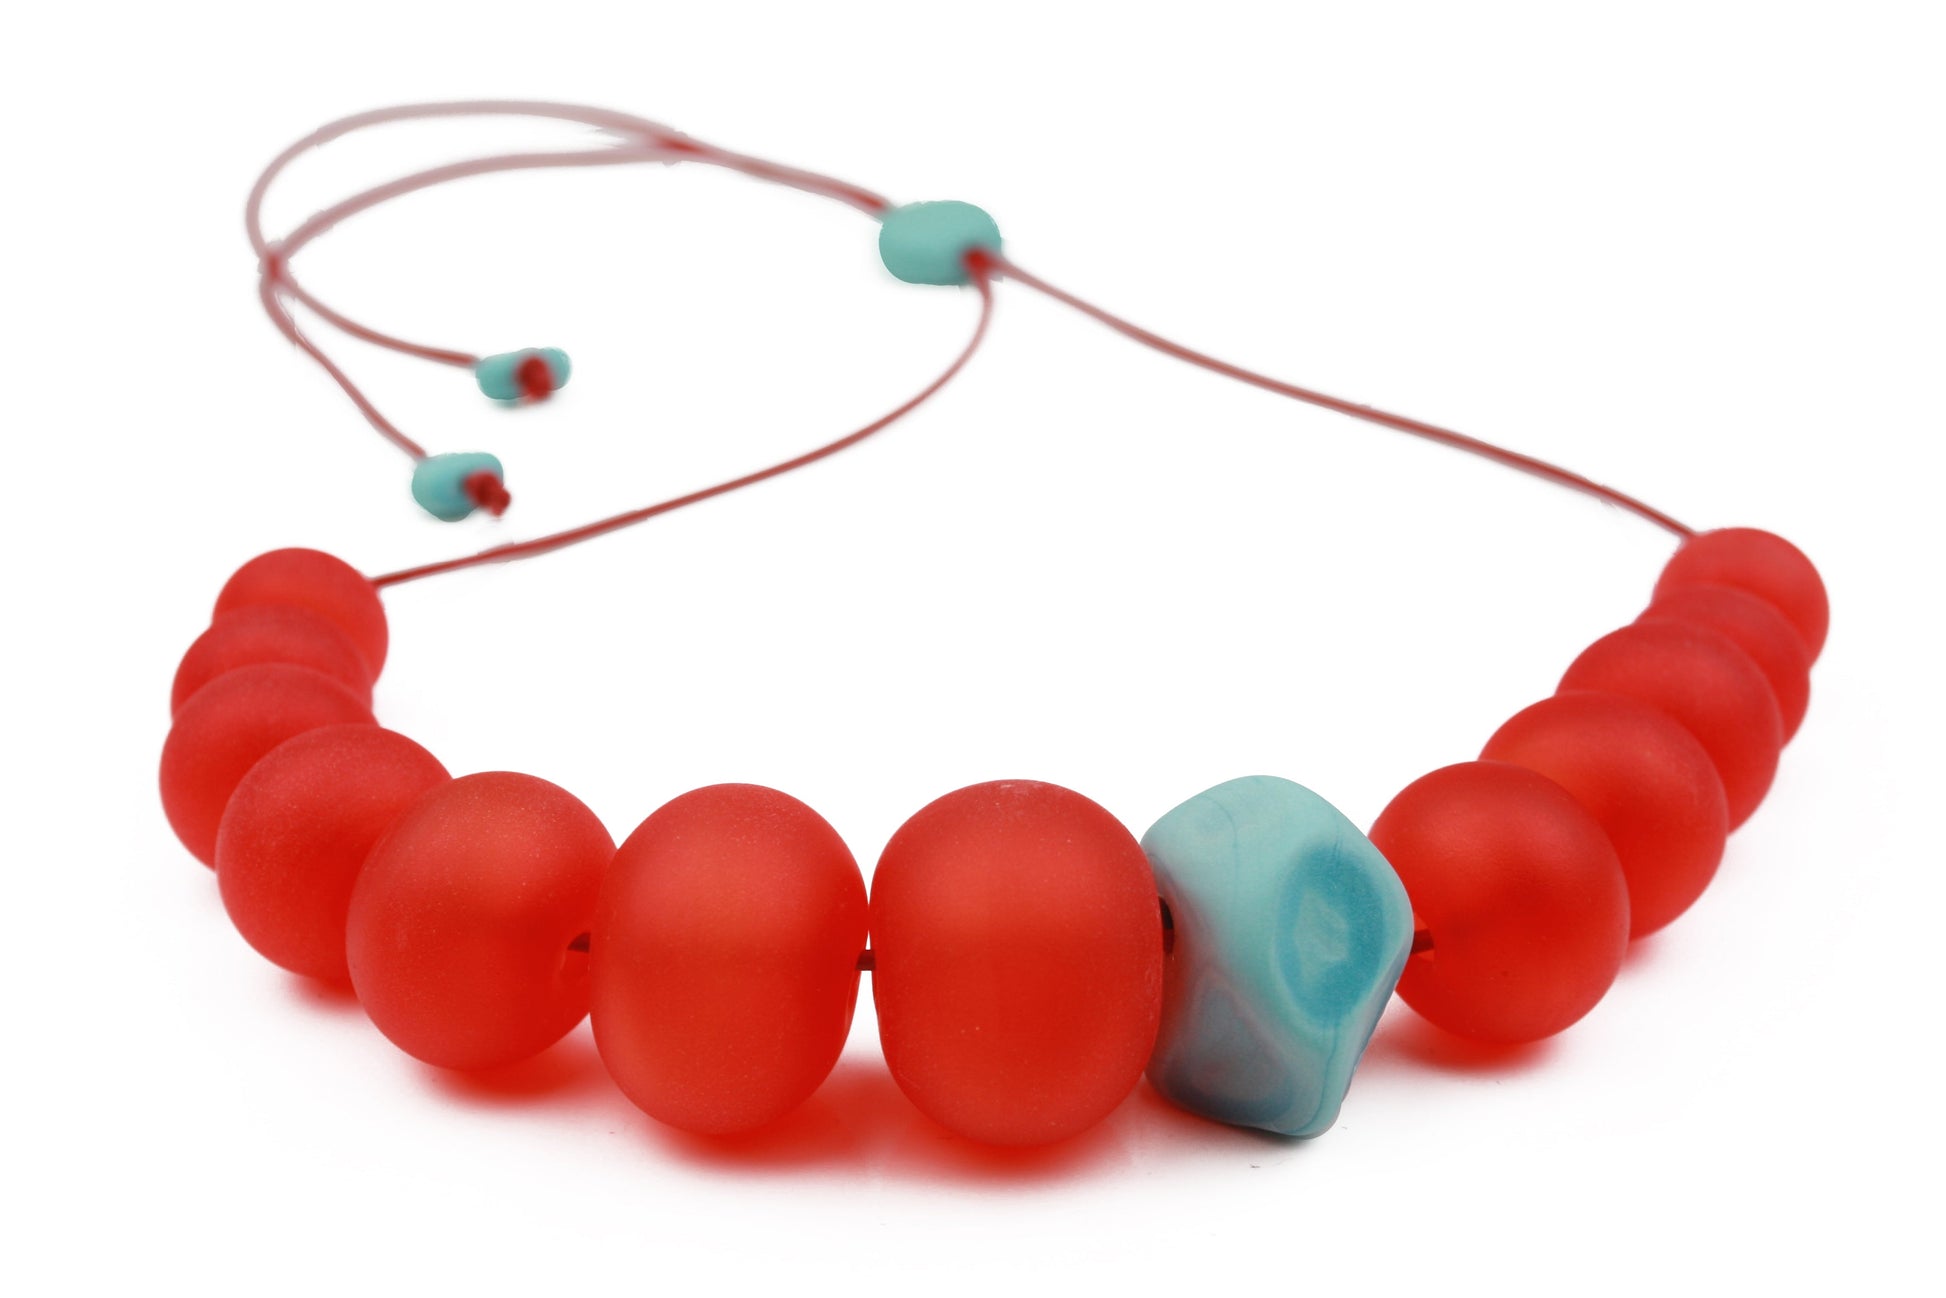 Necklace of hand blown and sandblasted hollow beads in velvety cherry red glass paired with a turquoise glass nugget bead and strung on adjustable leather